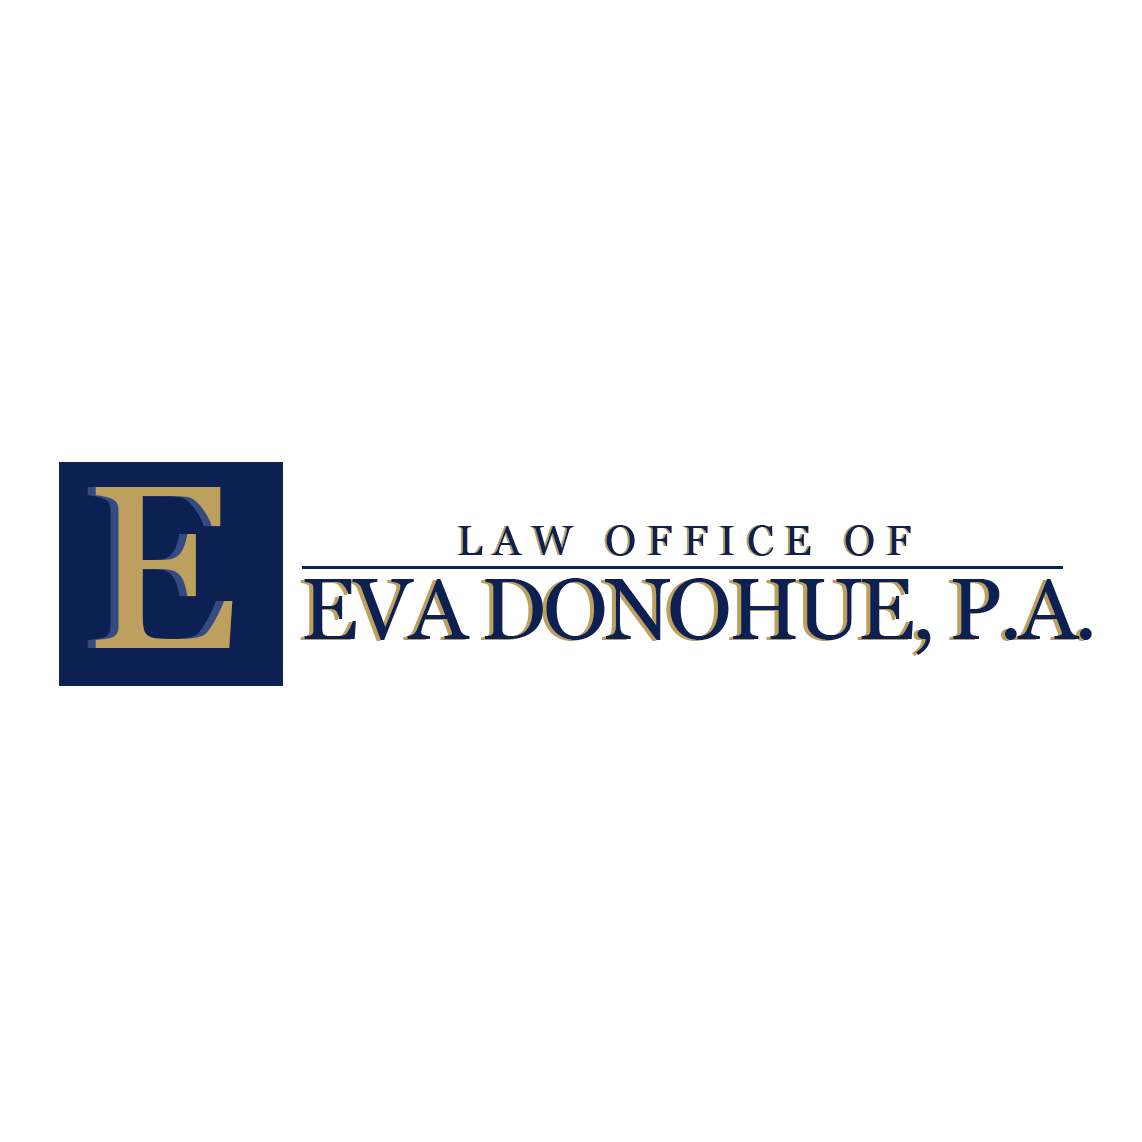 The Law Office of Eva M. Donohue, P.A. Logo